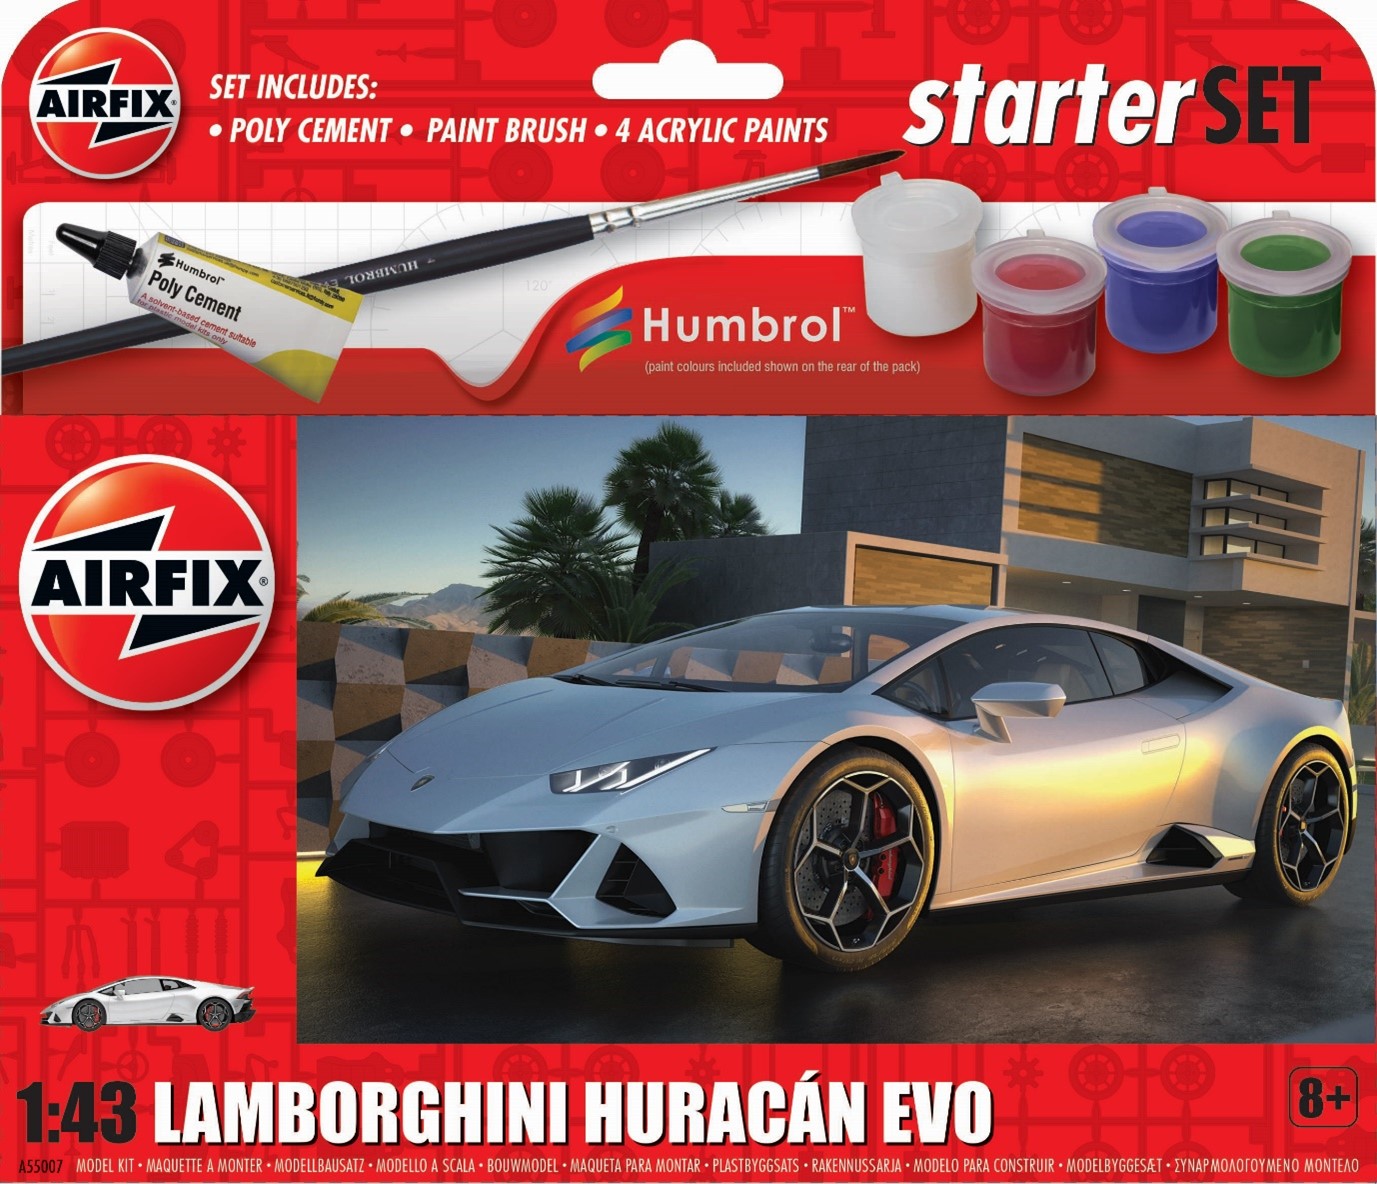 Airfix has revealed that its A55007 Lamborghini Huracán EVO Starter Set is now available in 1:43 scale.